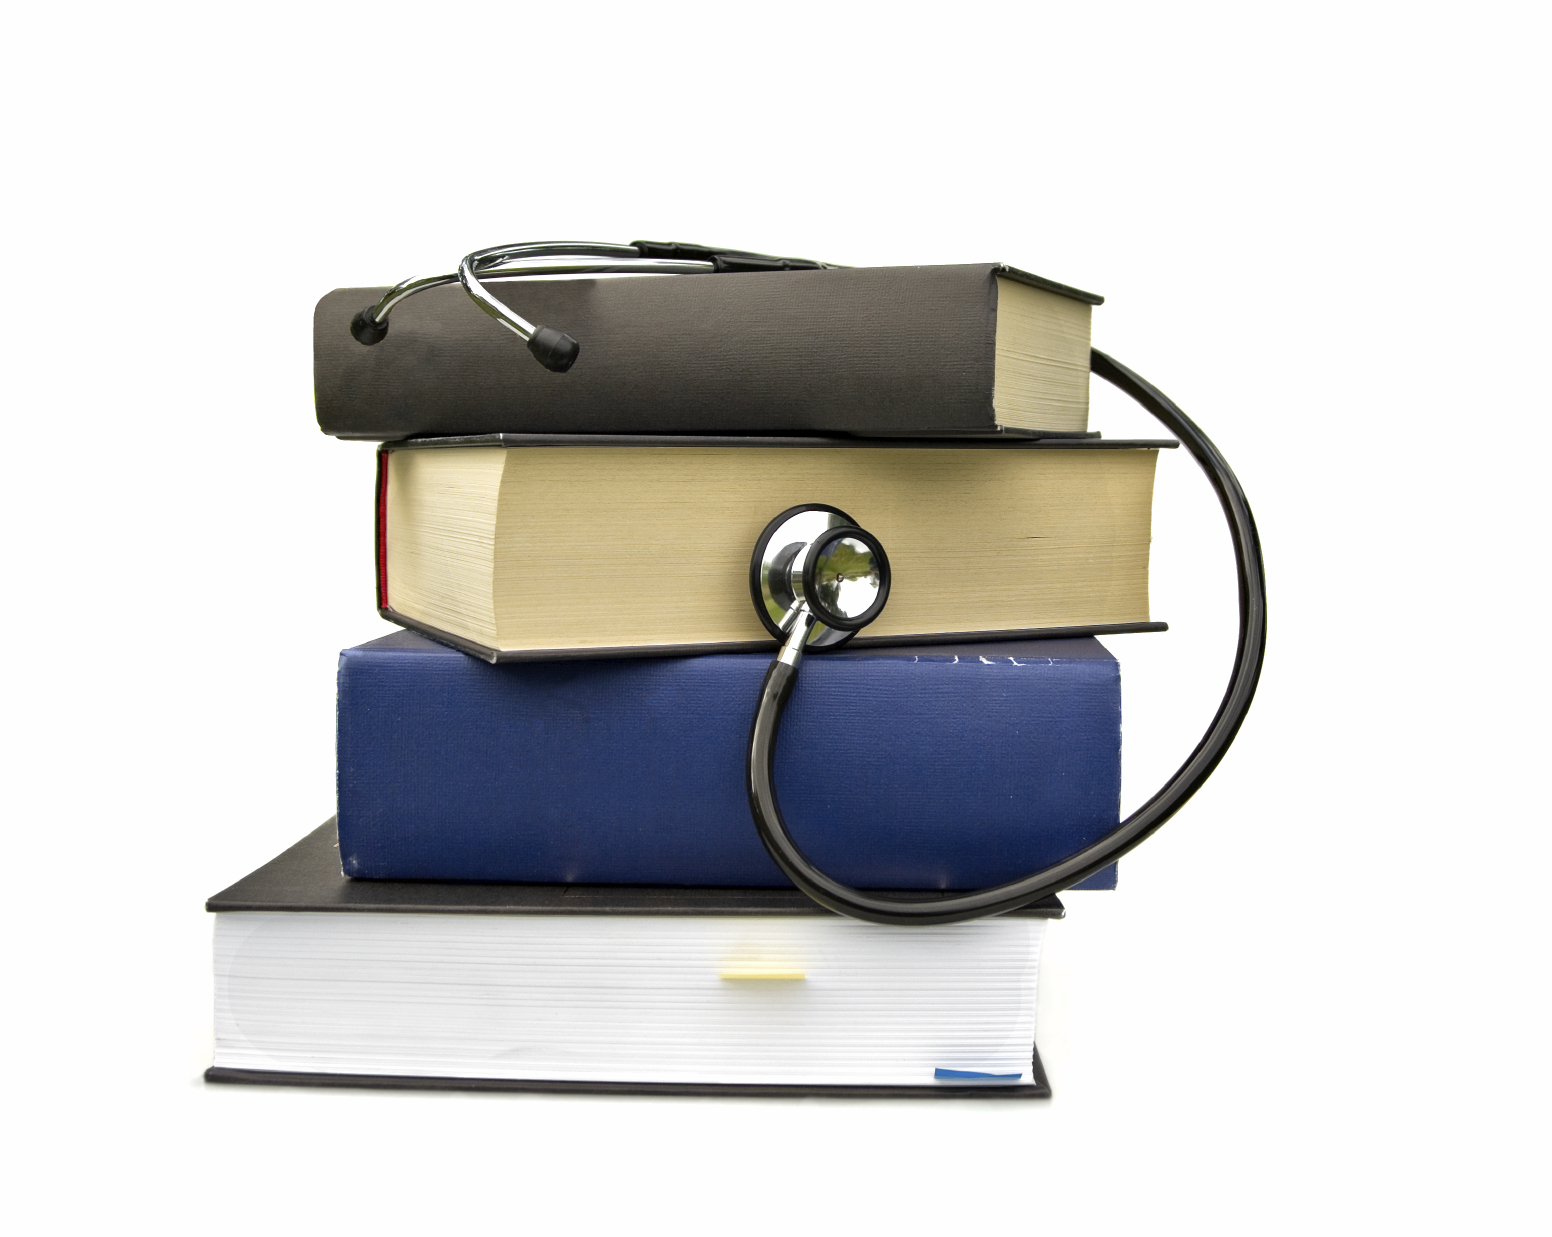 download medical books for free